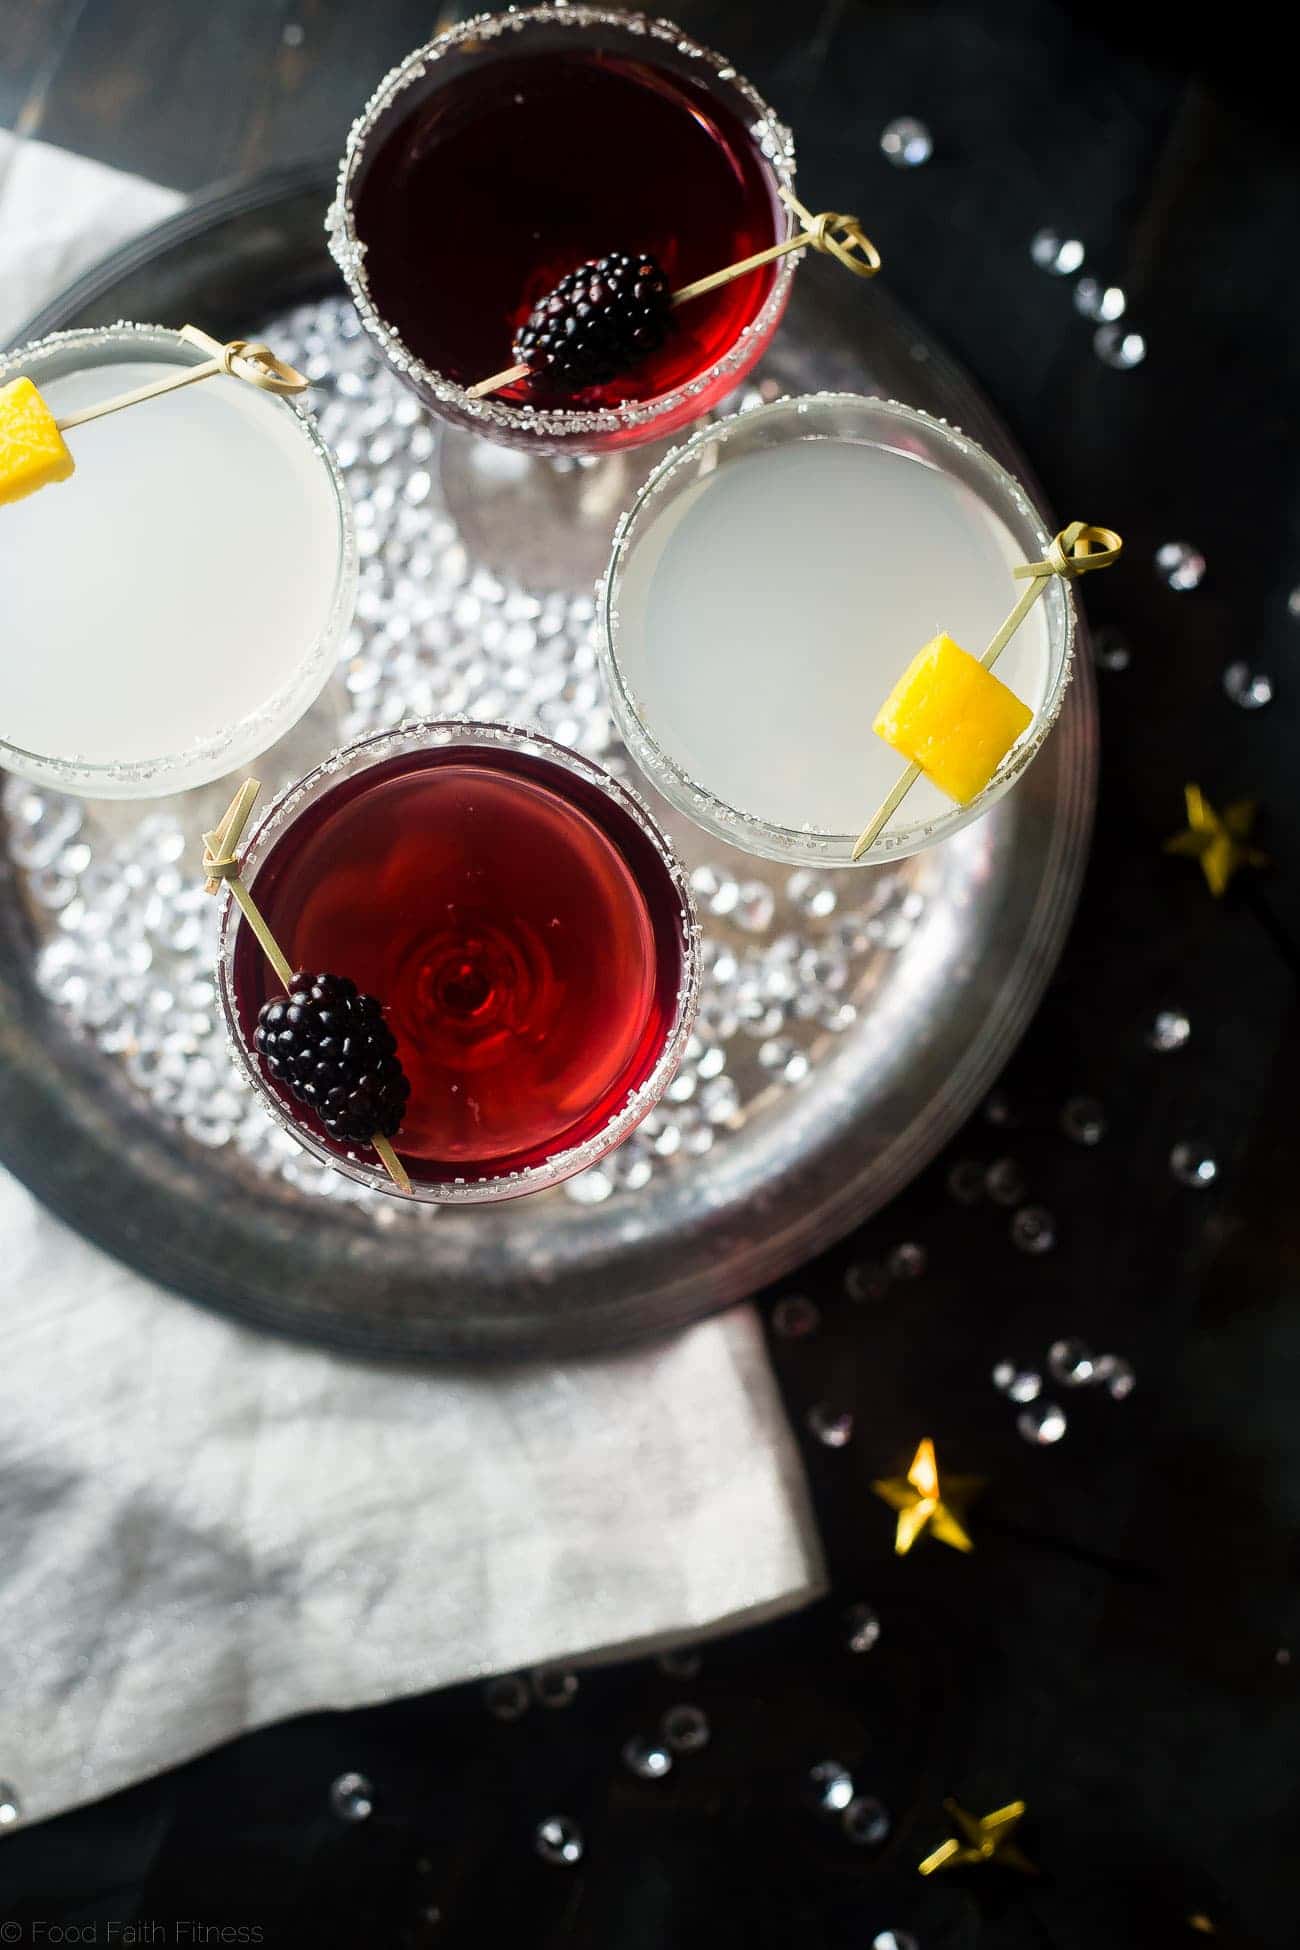 3 Ingredient Skinny Champagne Cocktails - Both of these blackberry raspberry and mango coconut sparkling champagne cocktails are under 150 calories and are naturally sweetened! Perfect for a healthy NYE! | Foodfaithfitness.com | @FoodFaithFit